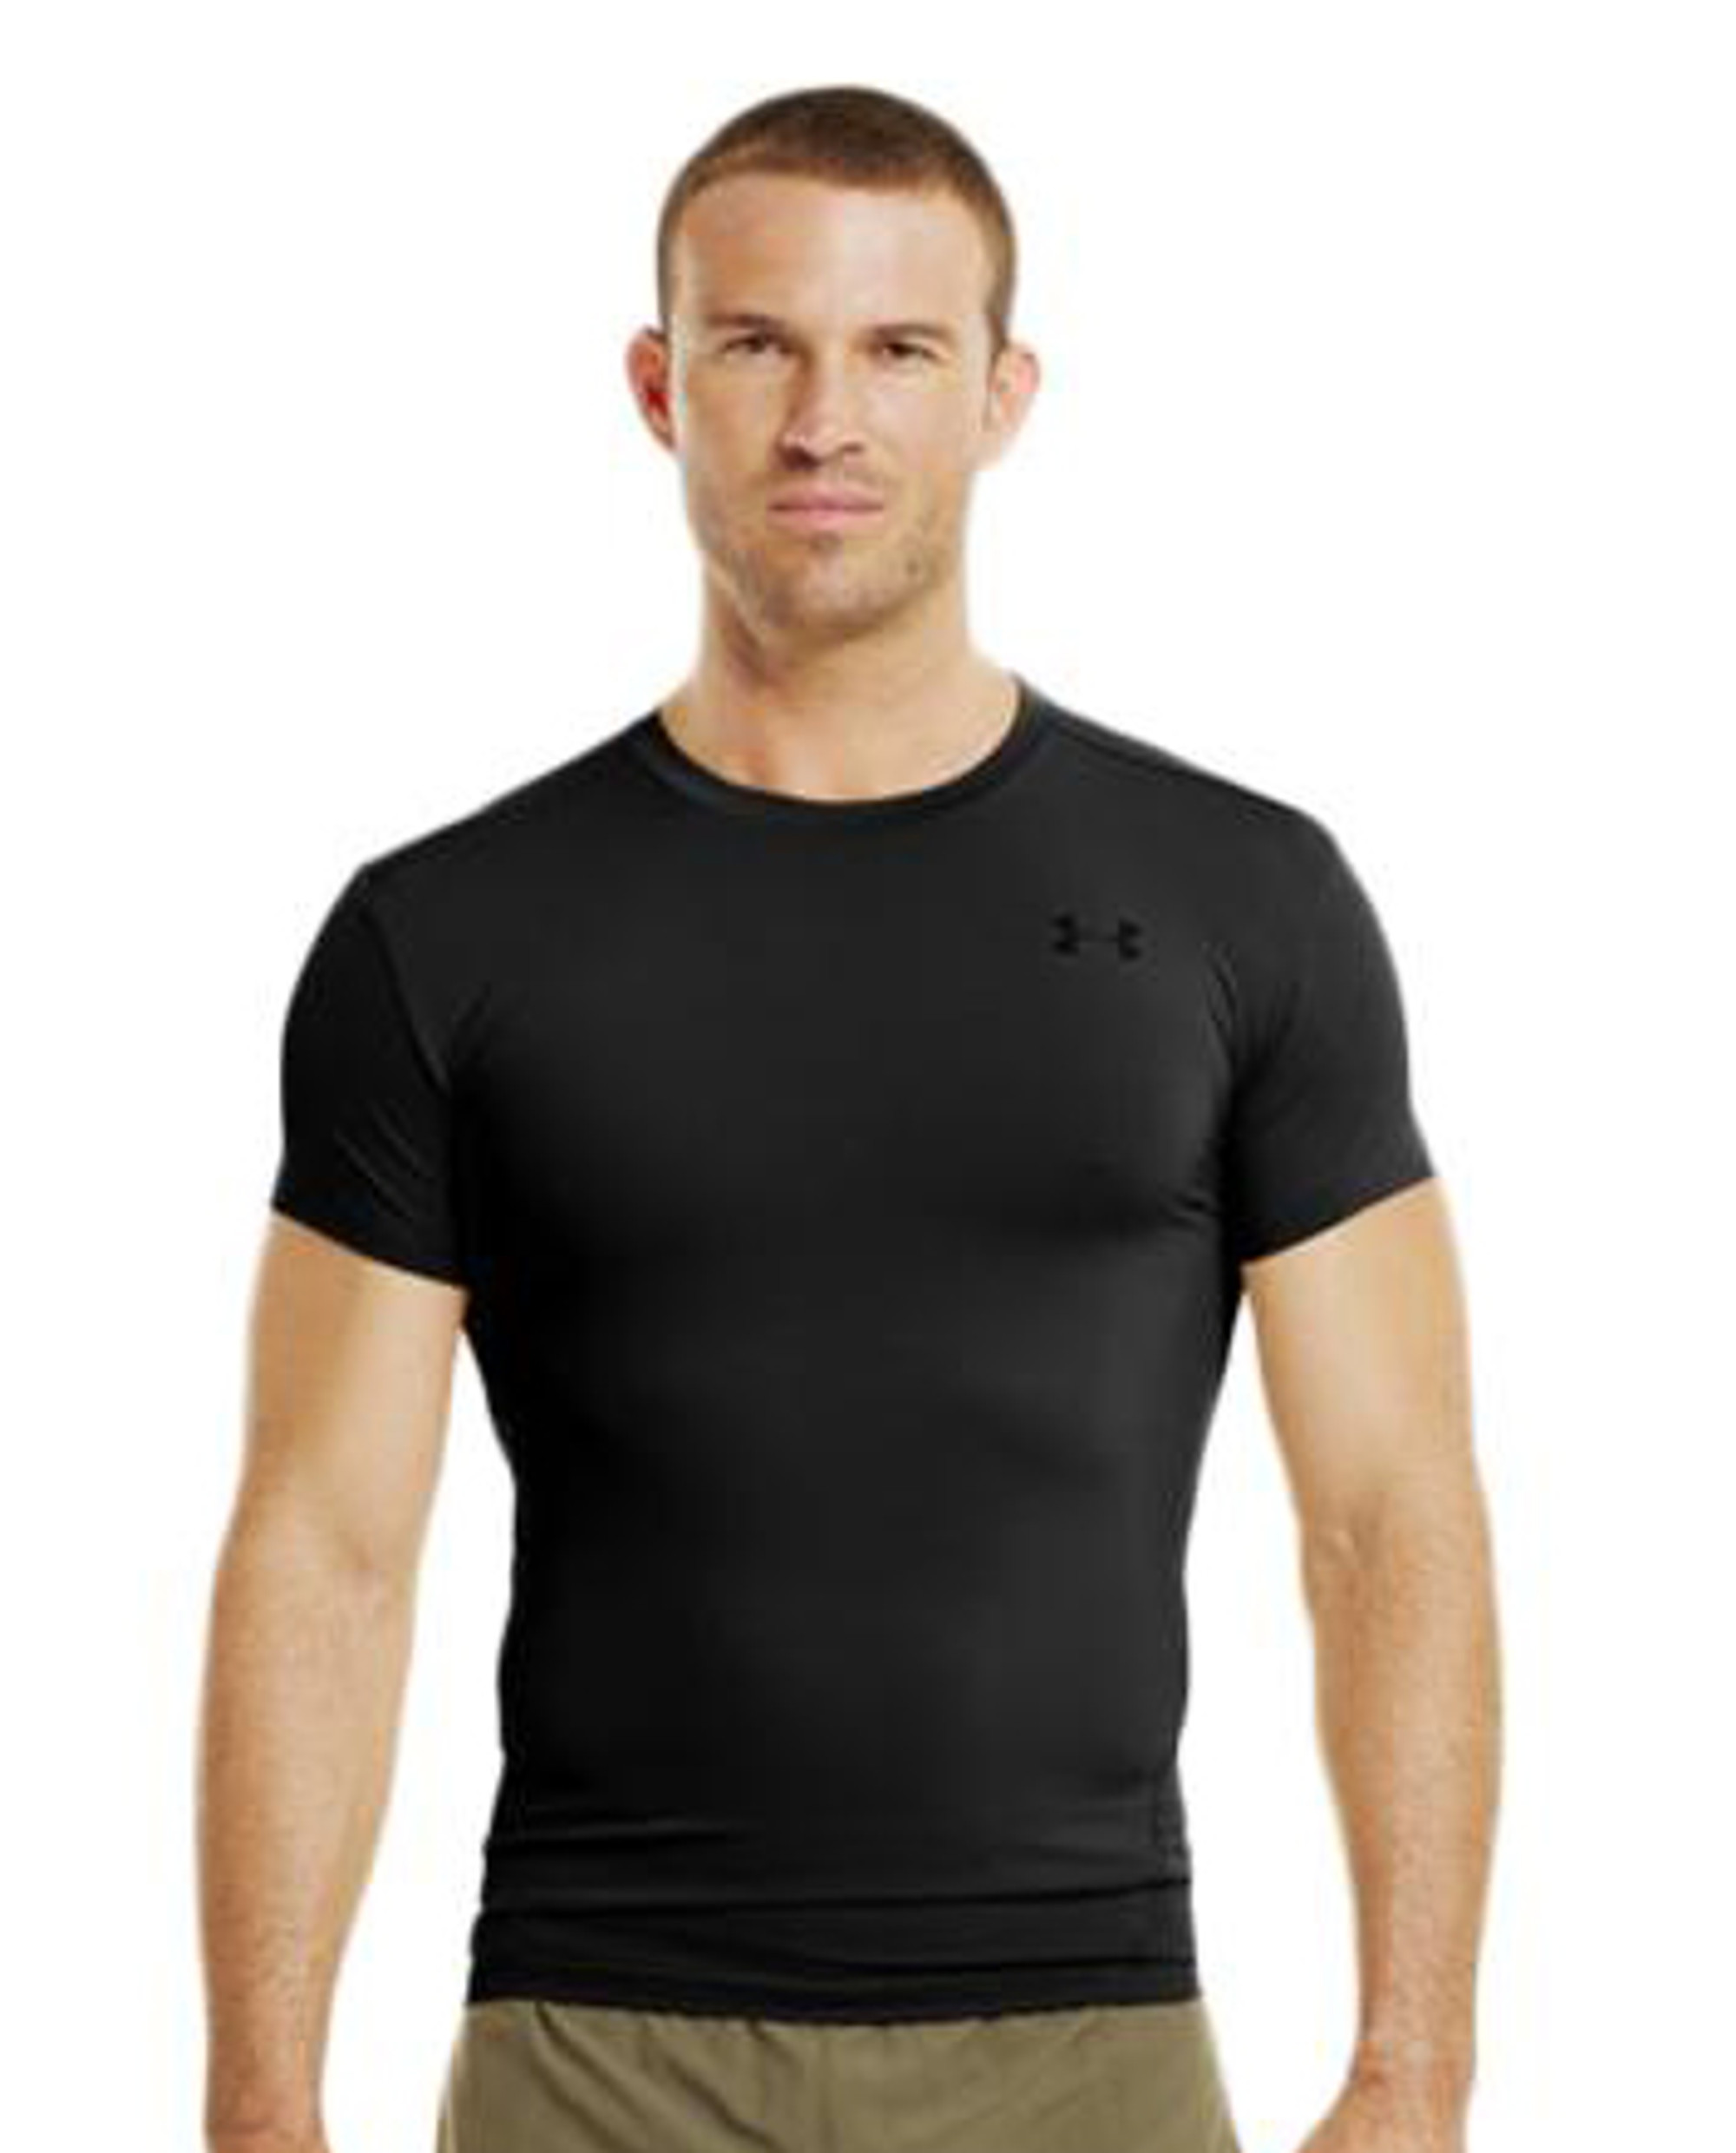  Under Armour Men's HeatGear Tactical Compression Short-Sleeve  T-Shirt, Black (001)/Federal Tan, X-Small : Clothing, Shoes & Jewelry